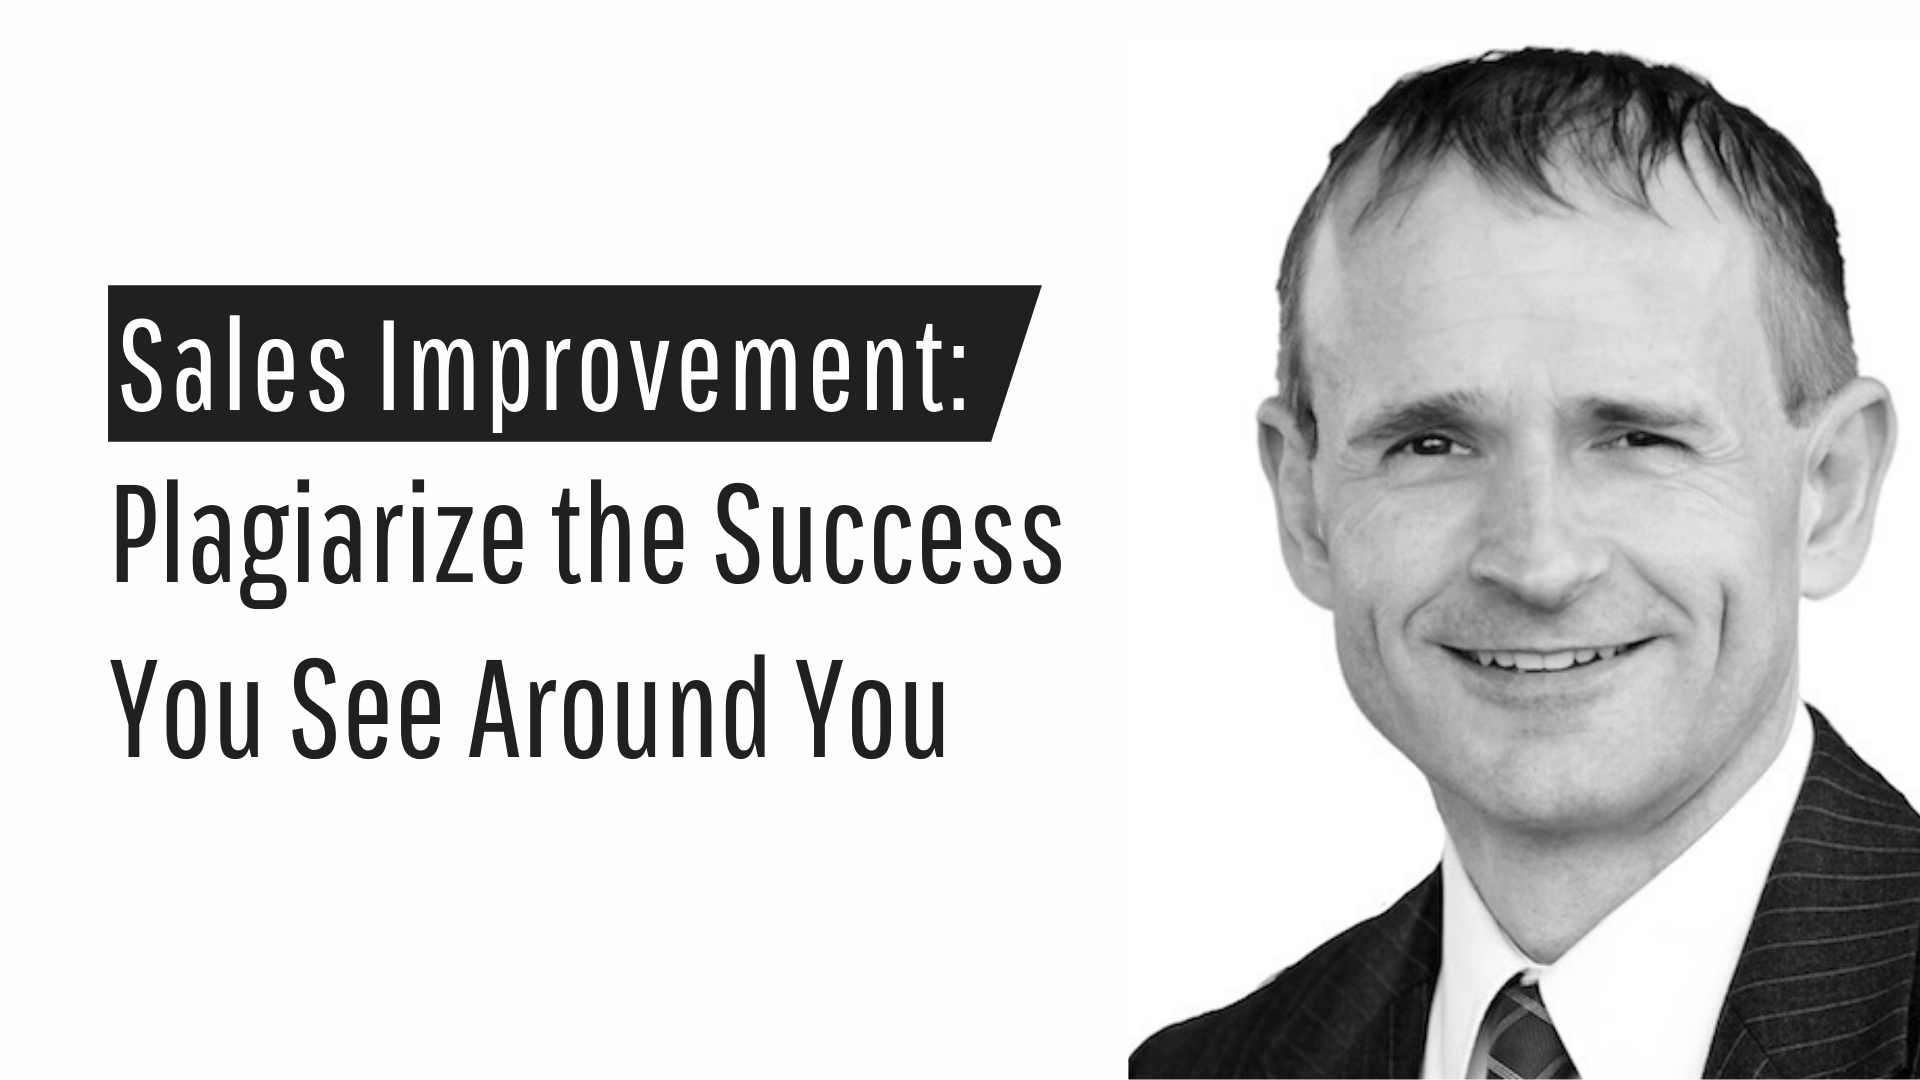 Sales Improvement: Plagiarize the Success You See Around You